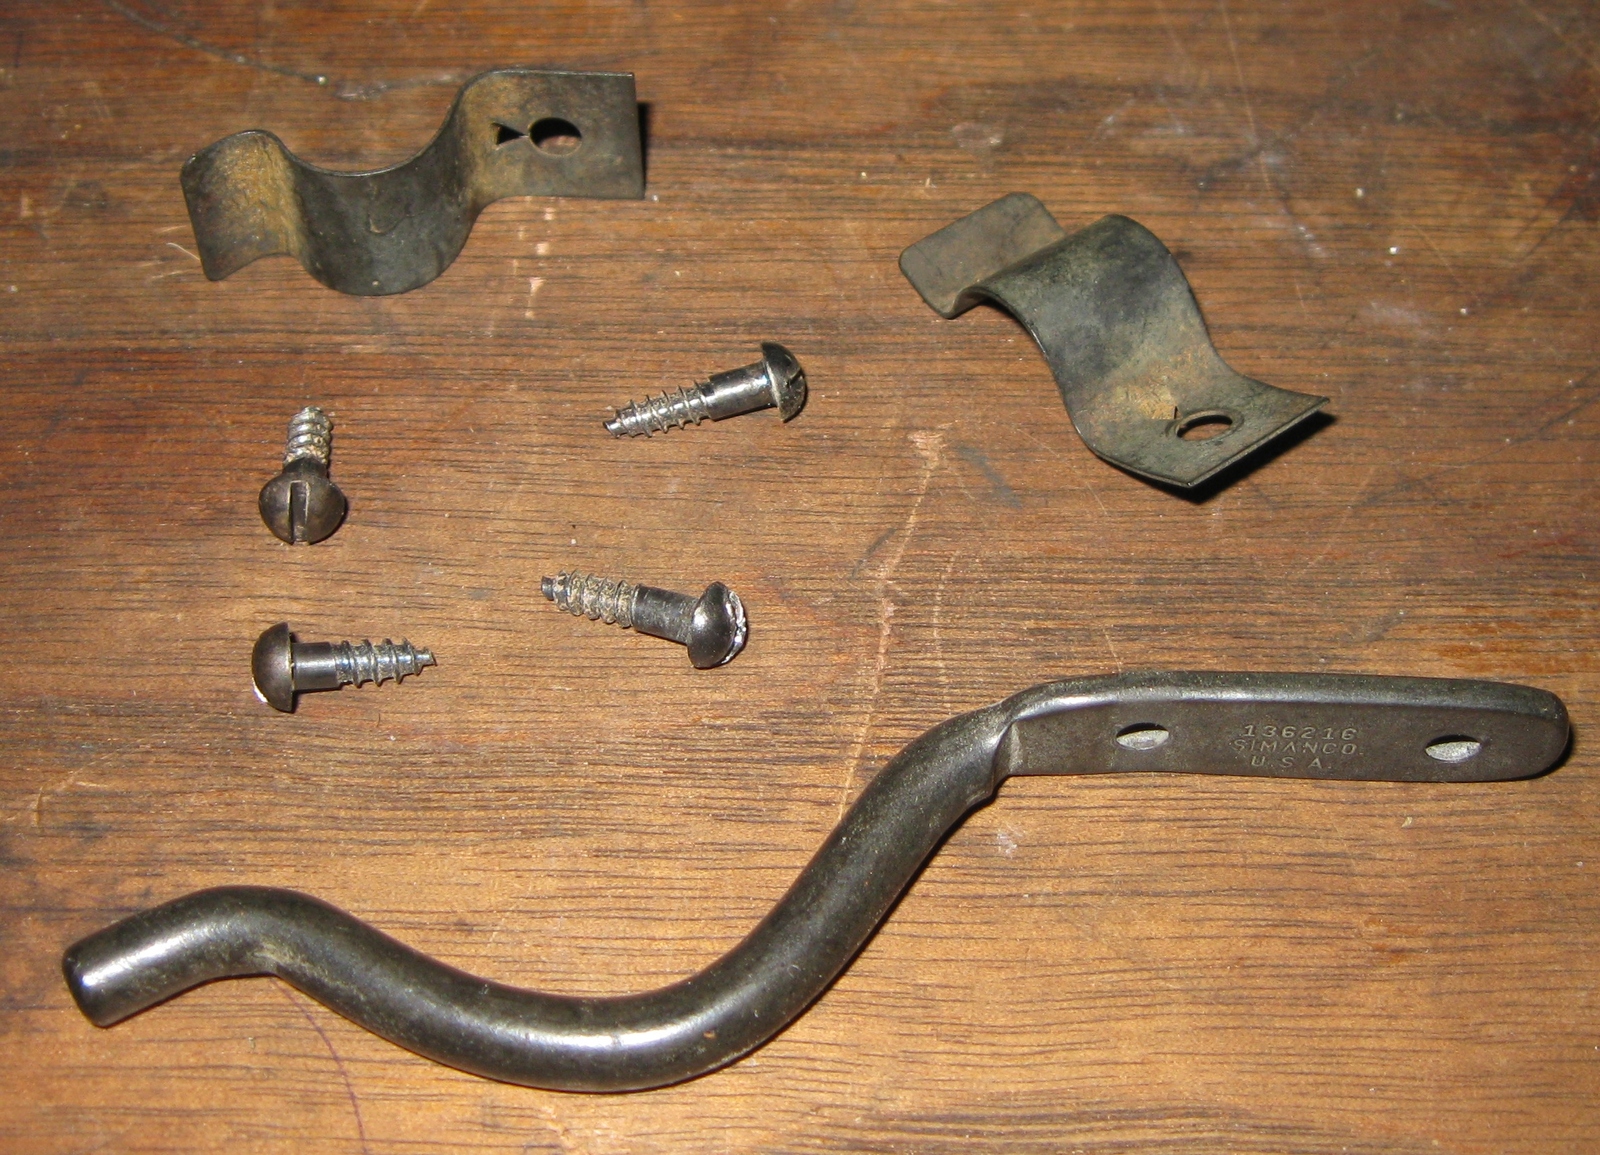 Singer Cabinet Cord Hook #136216 & Clamps w/Screws - $10.00